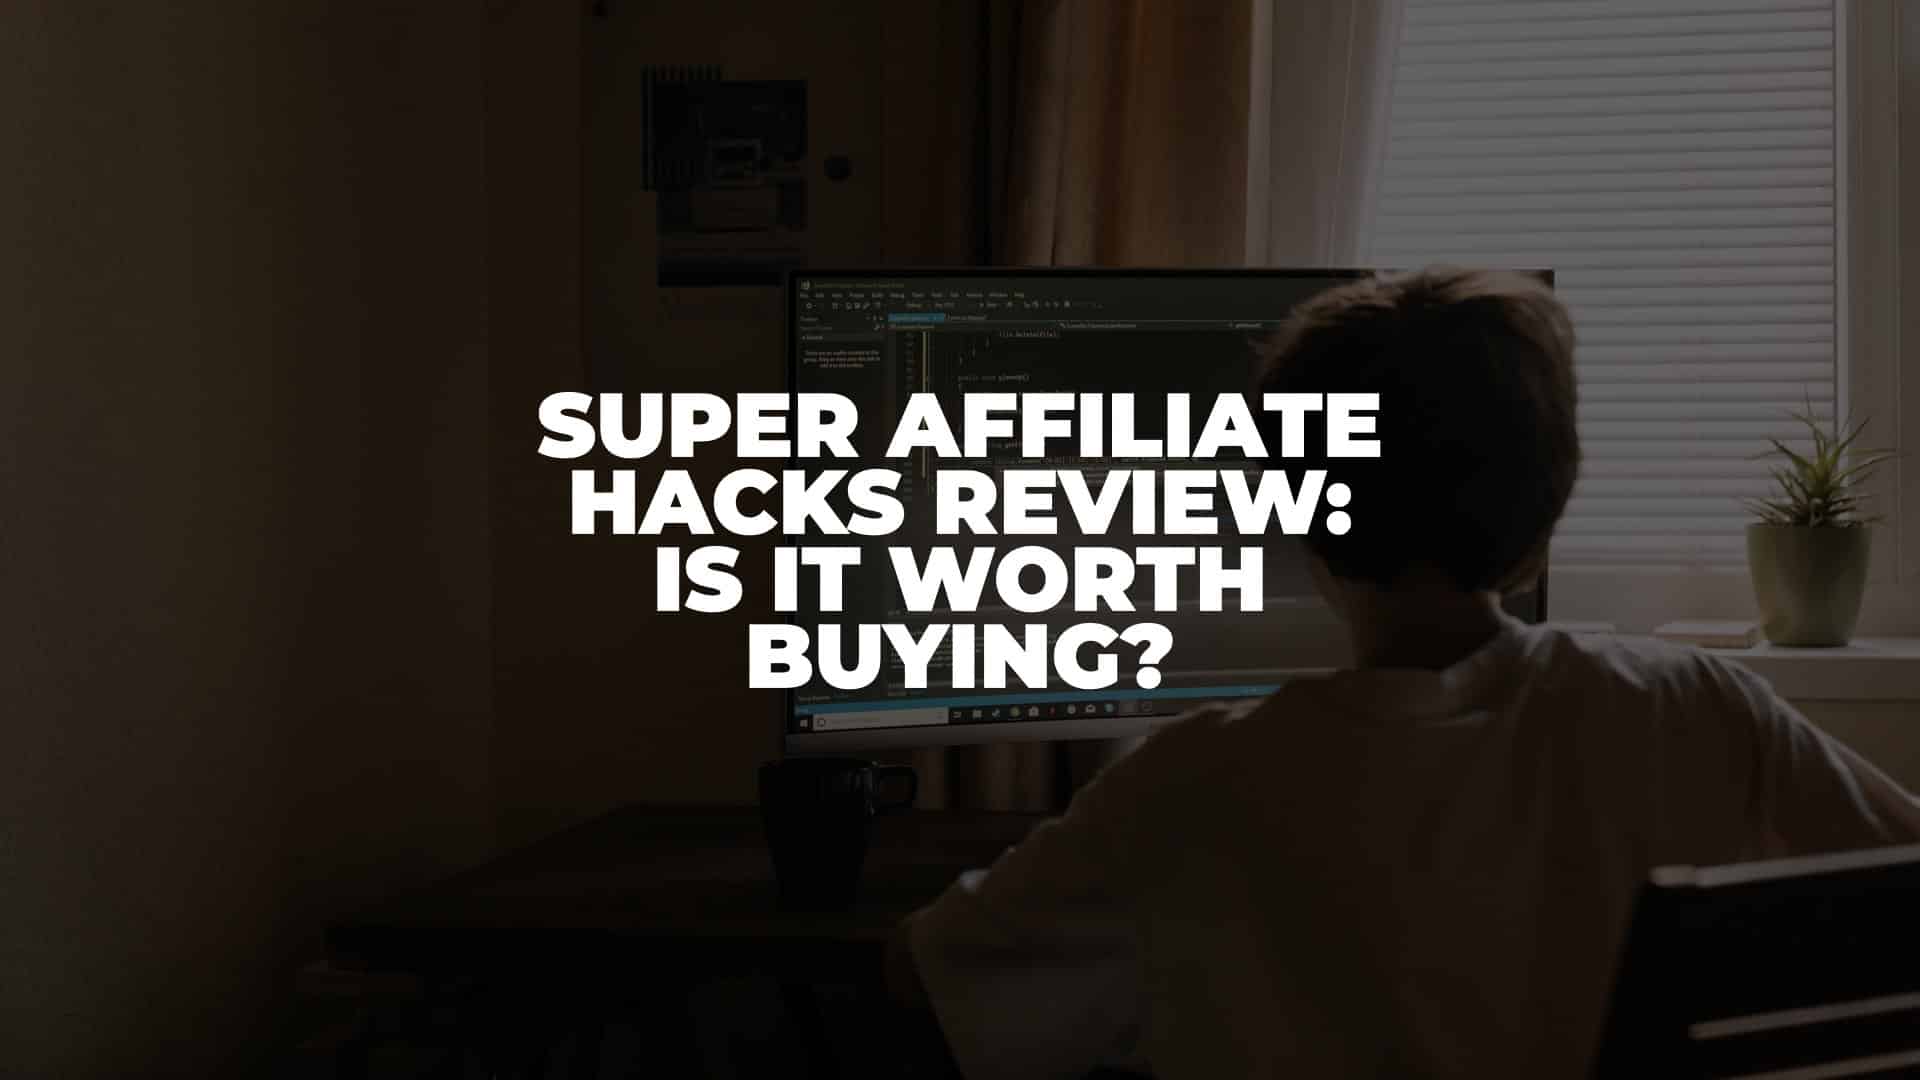 Super Affiliate Hacks Review - Featured Image